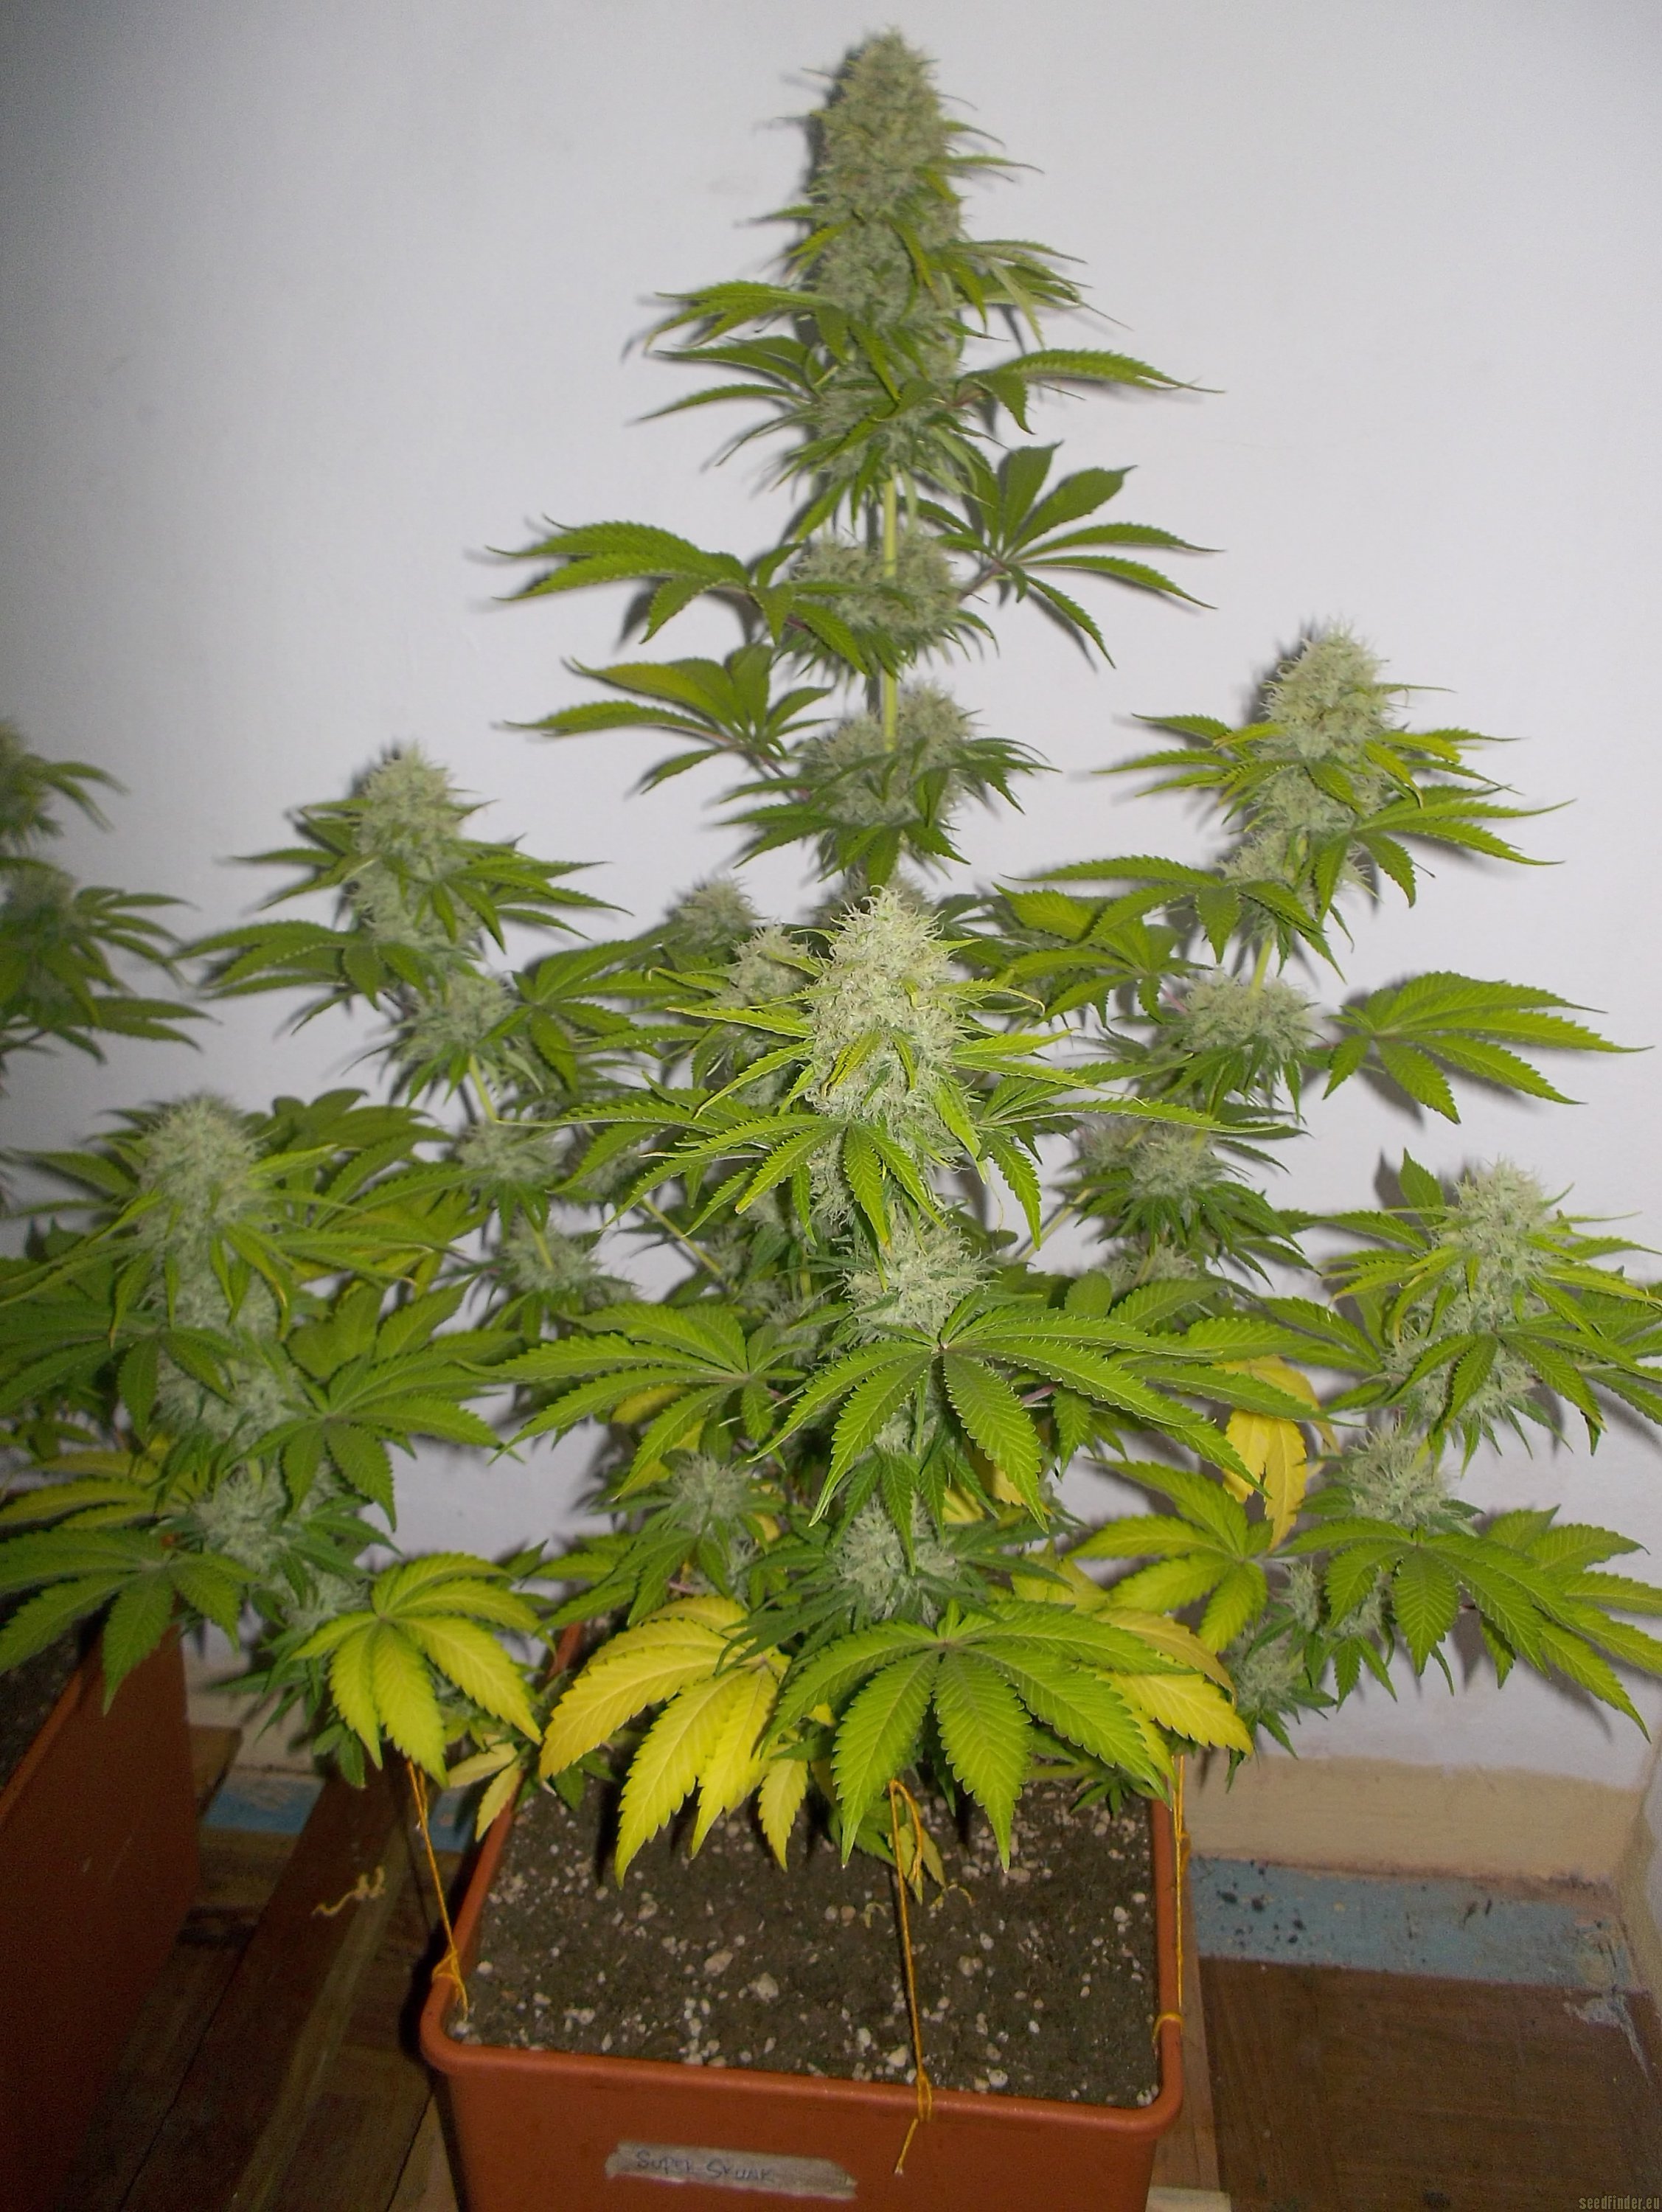 Auto Flowering Seeds For Sale